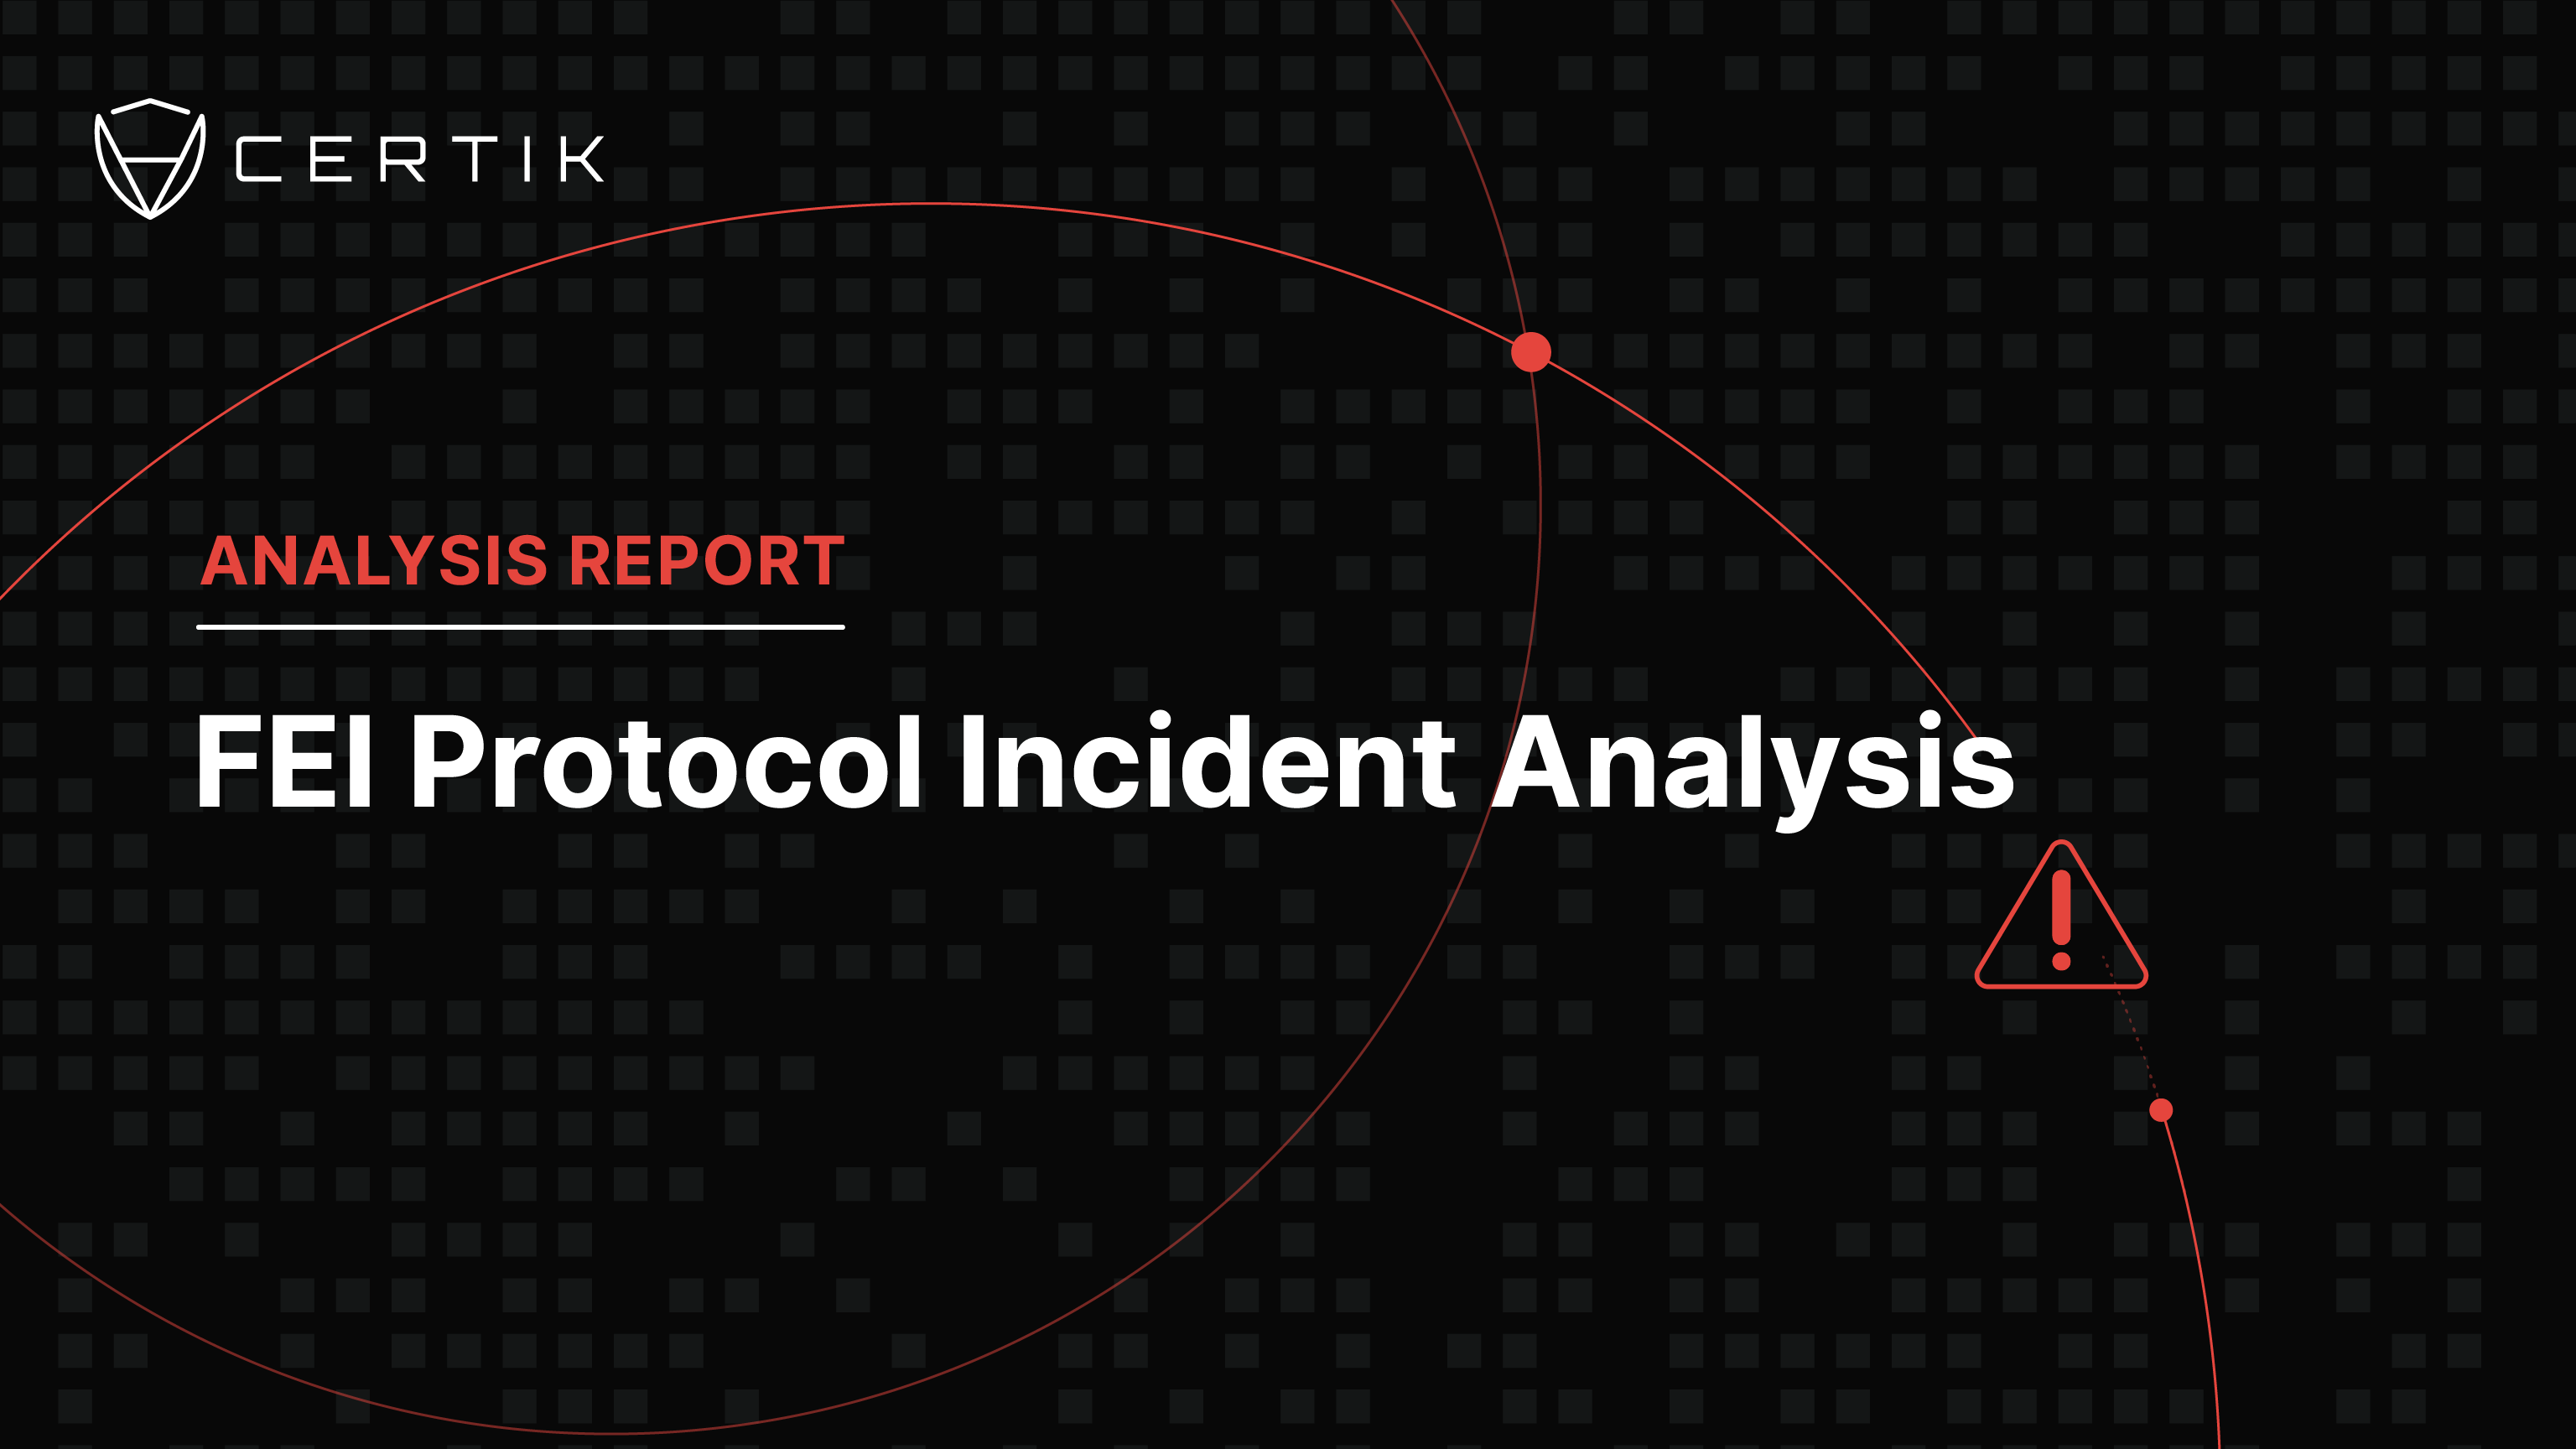 Revisiting FEI Protocol Incident